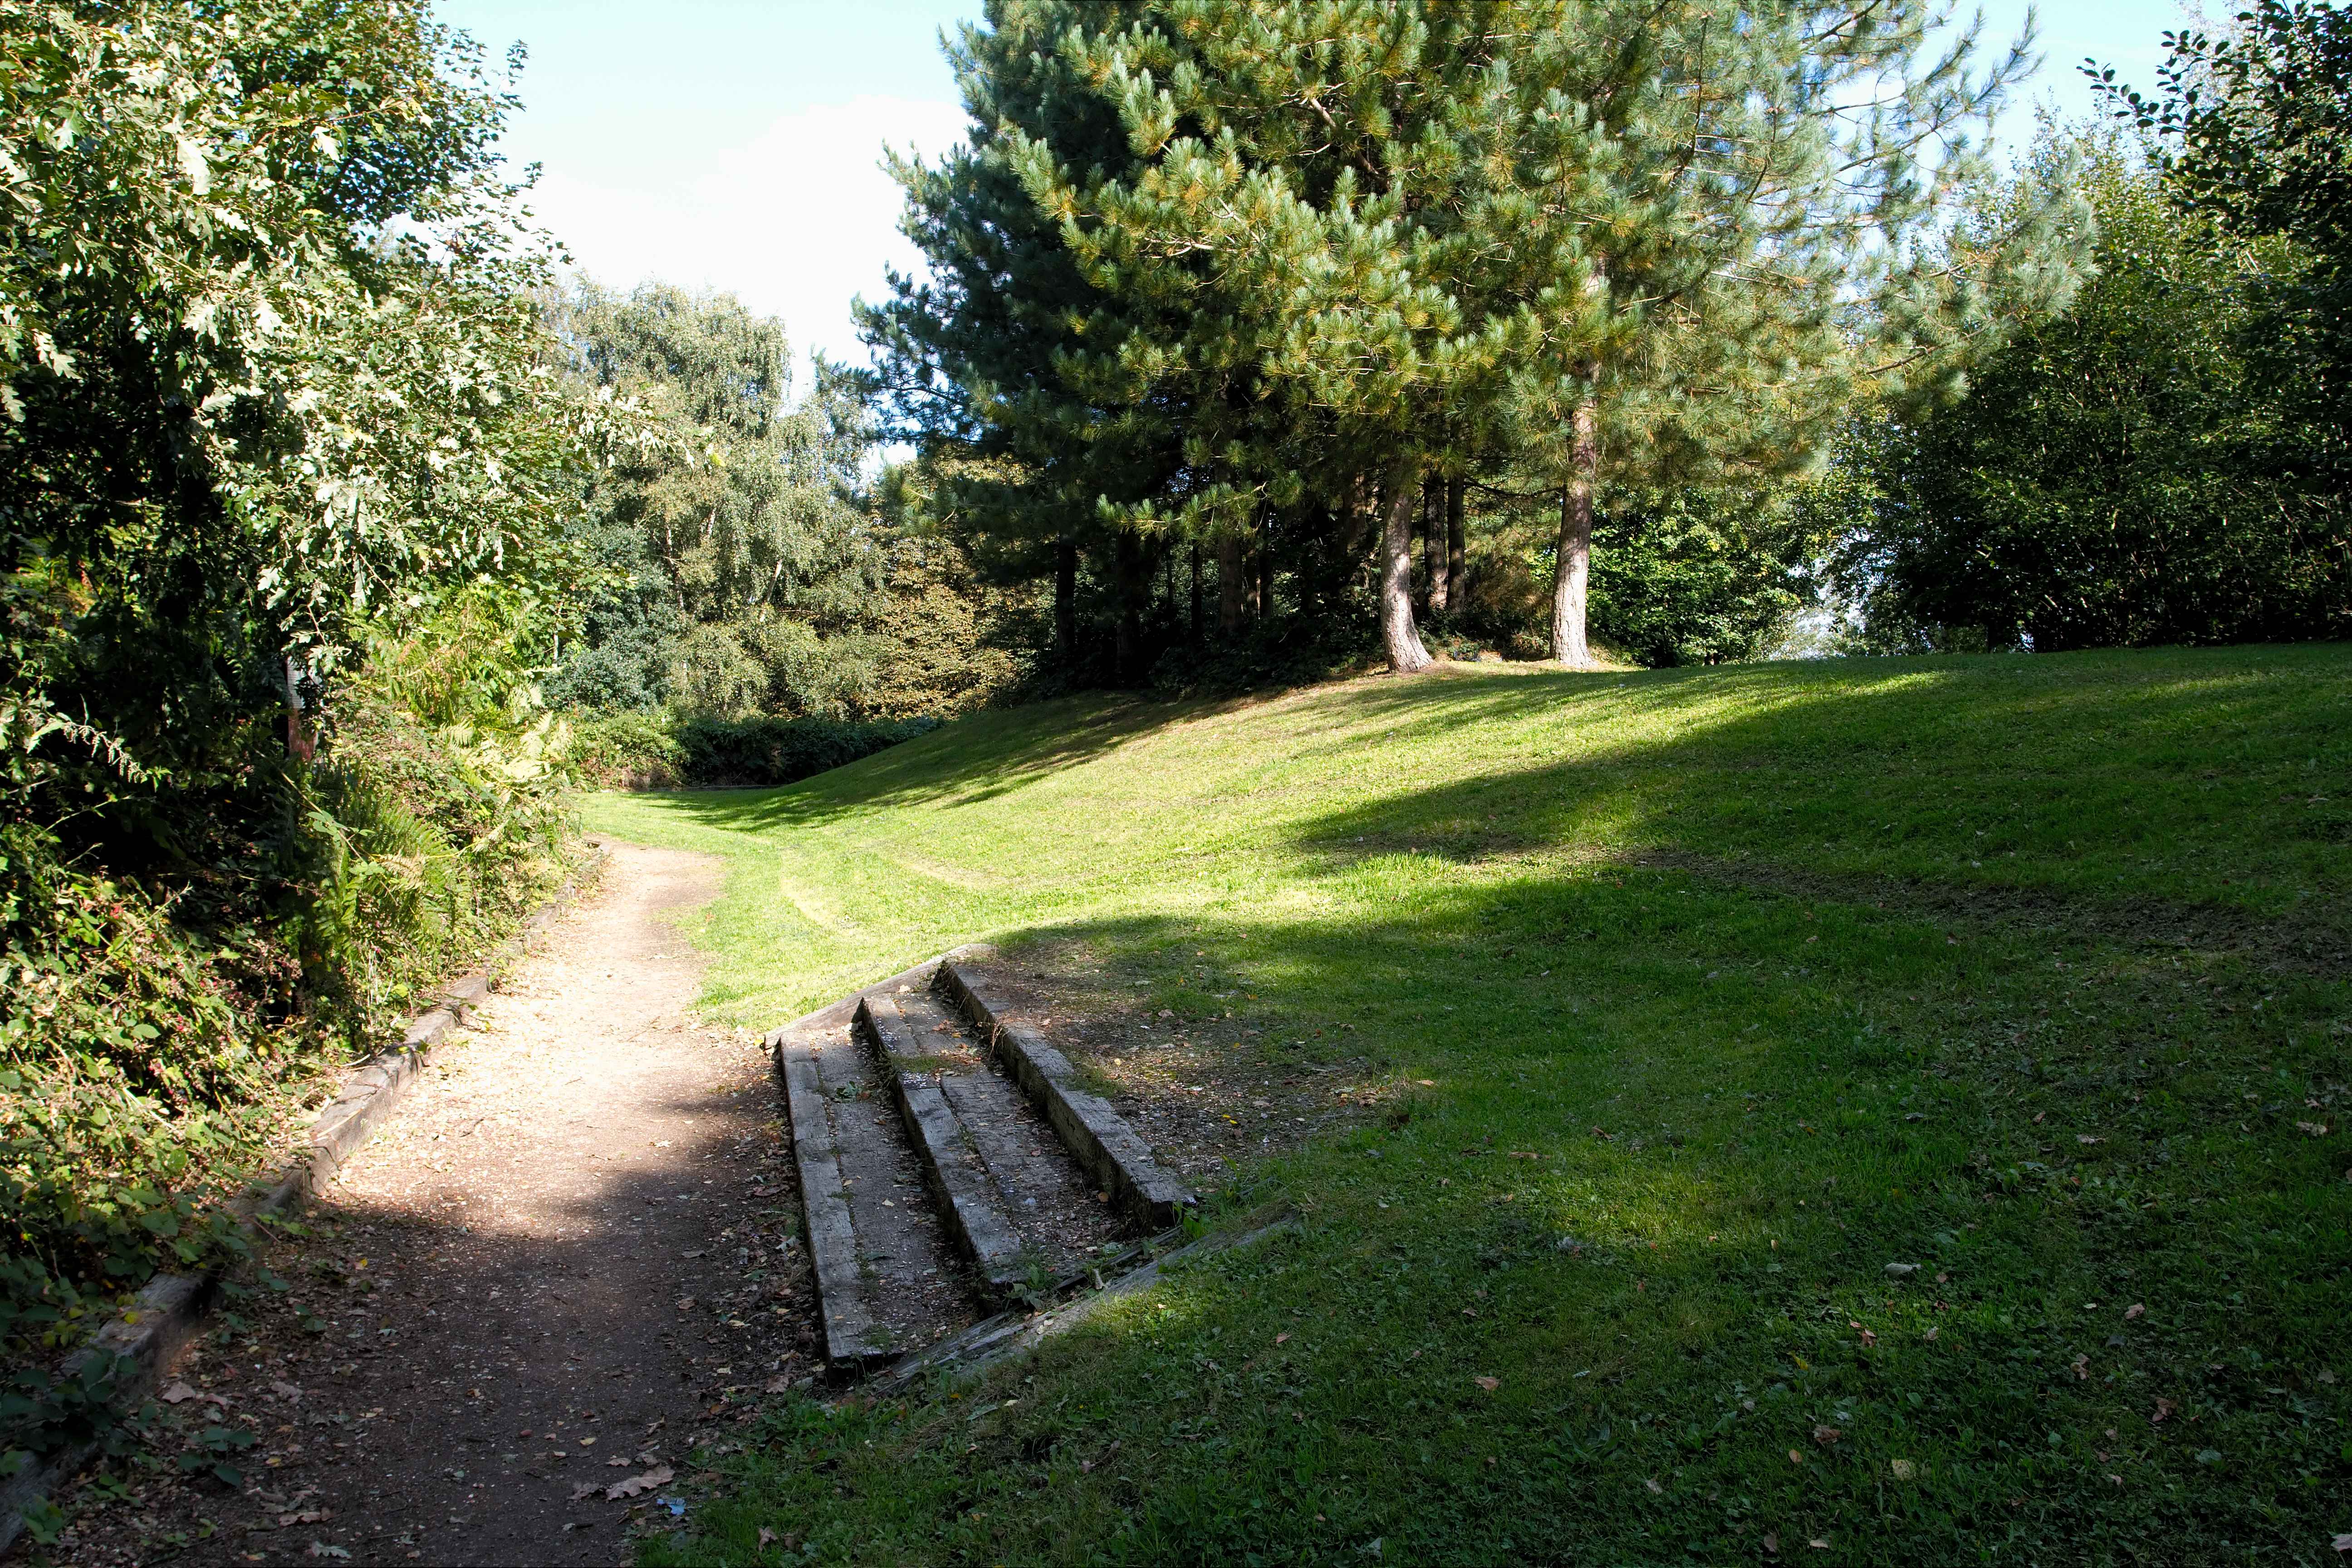 The fortifications at Redan Hill